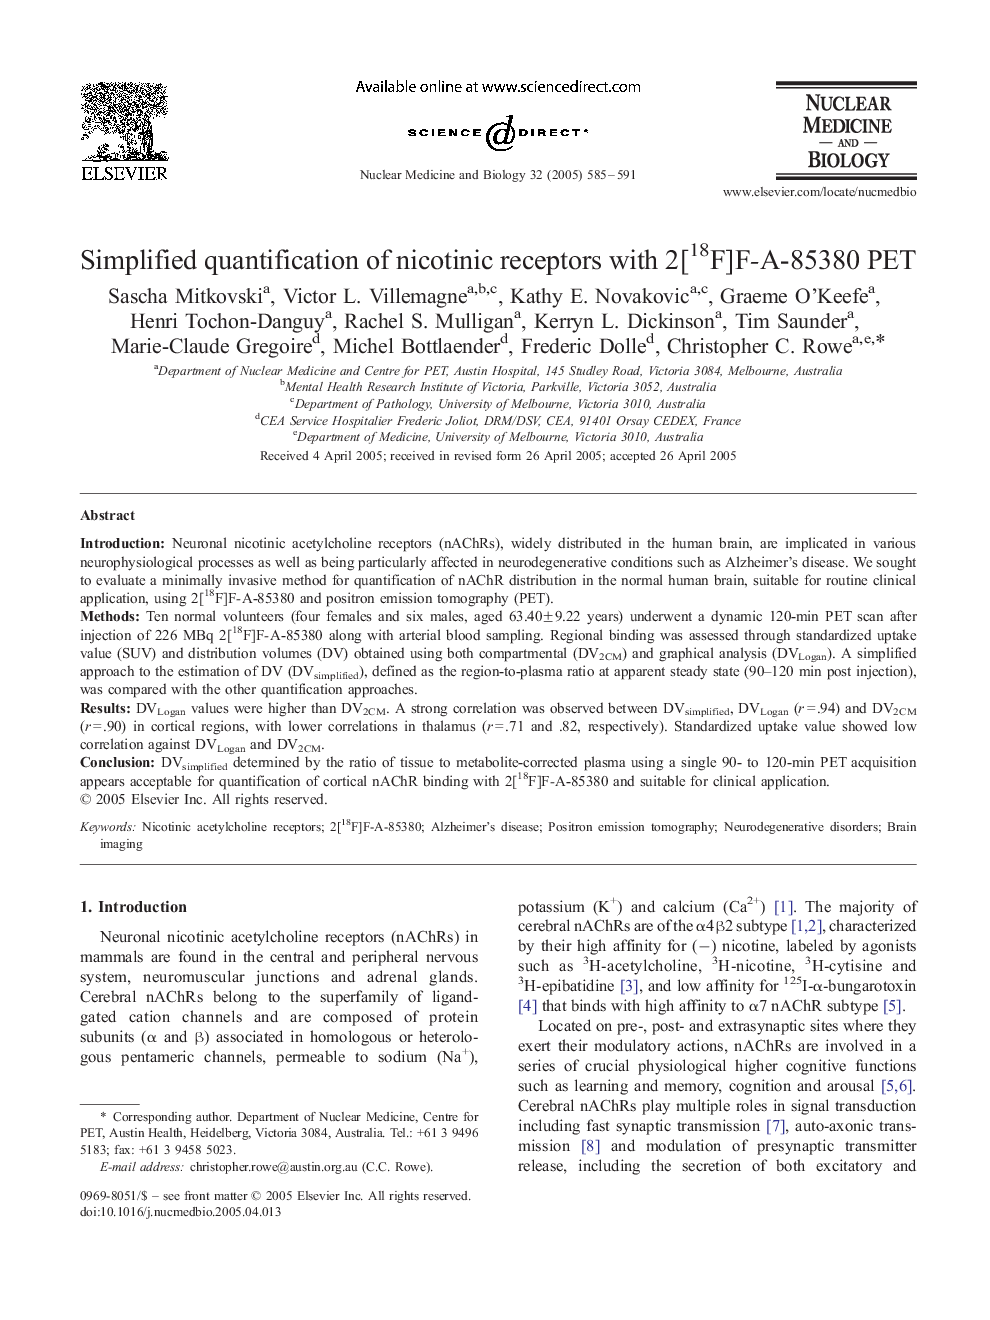 Simplified quantification of nicotinic receptors with 2[18F]F-A-85380 PET